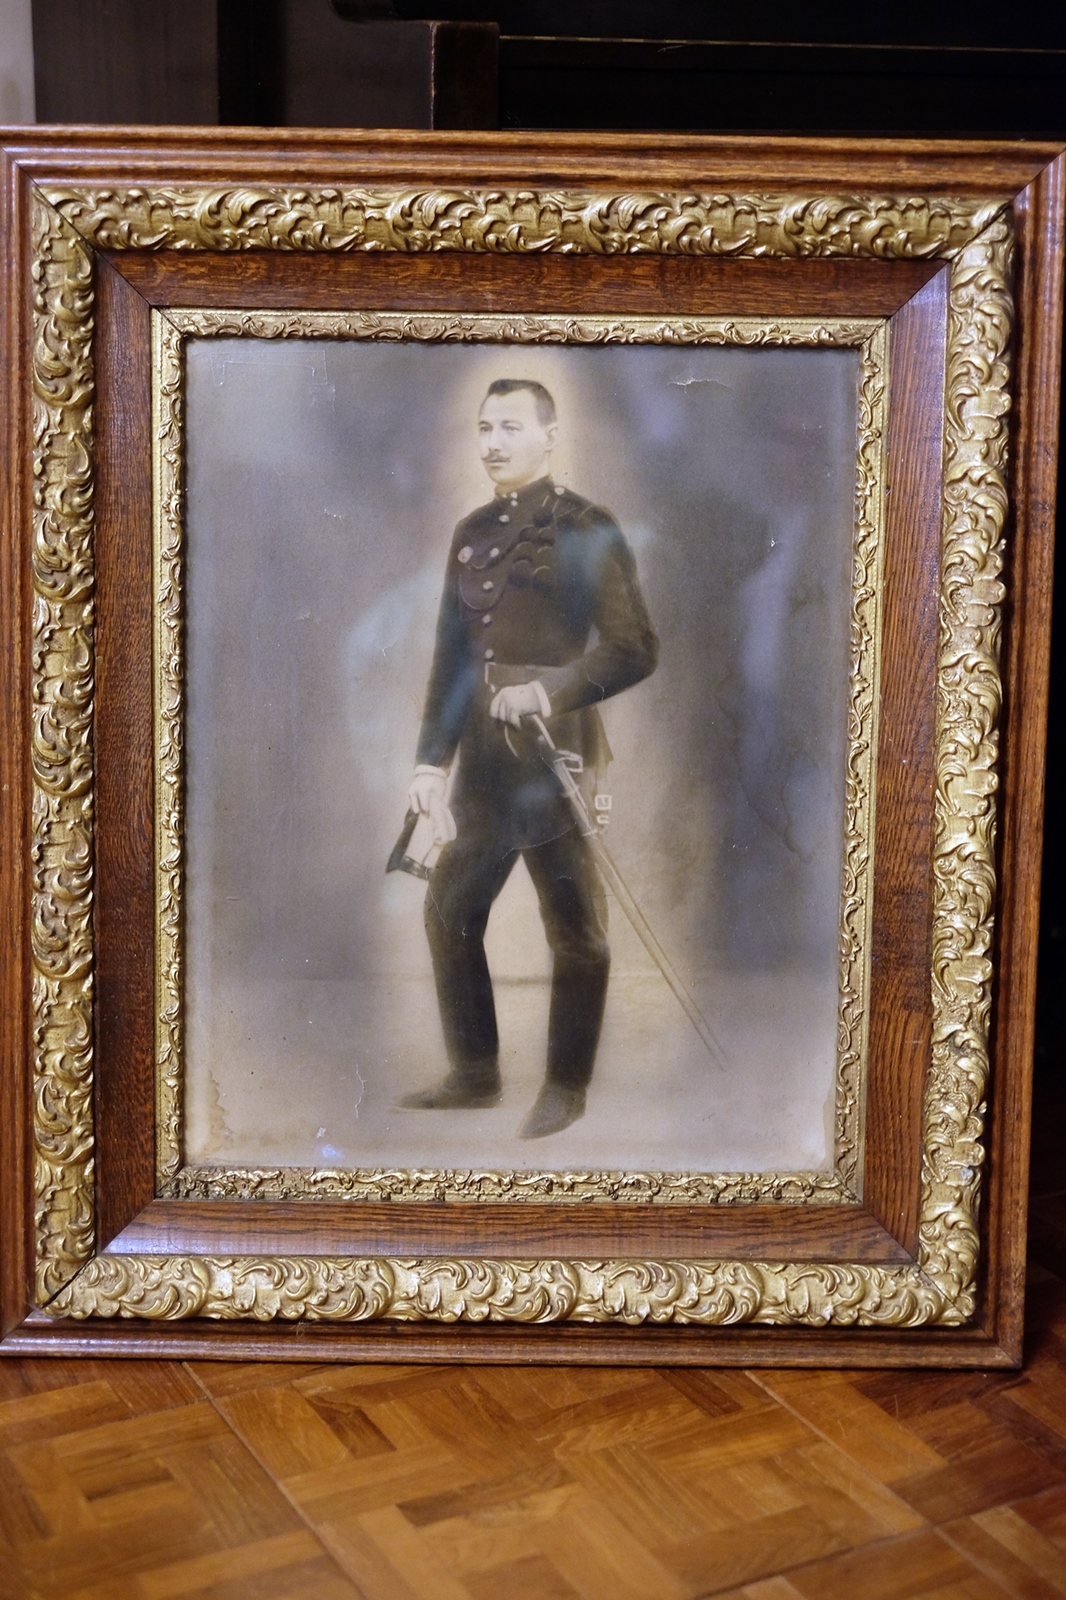 Antique Albumen Print of Uniformed Soldier with Sword – For My Generation